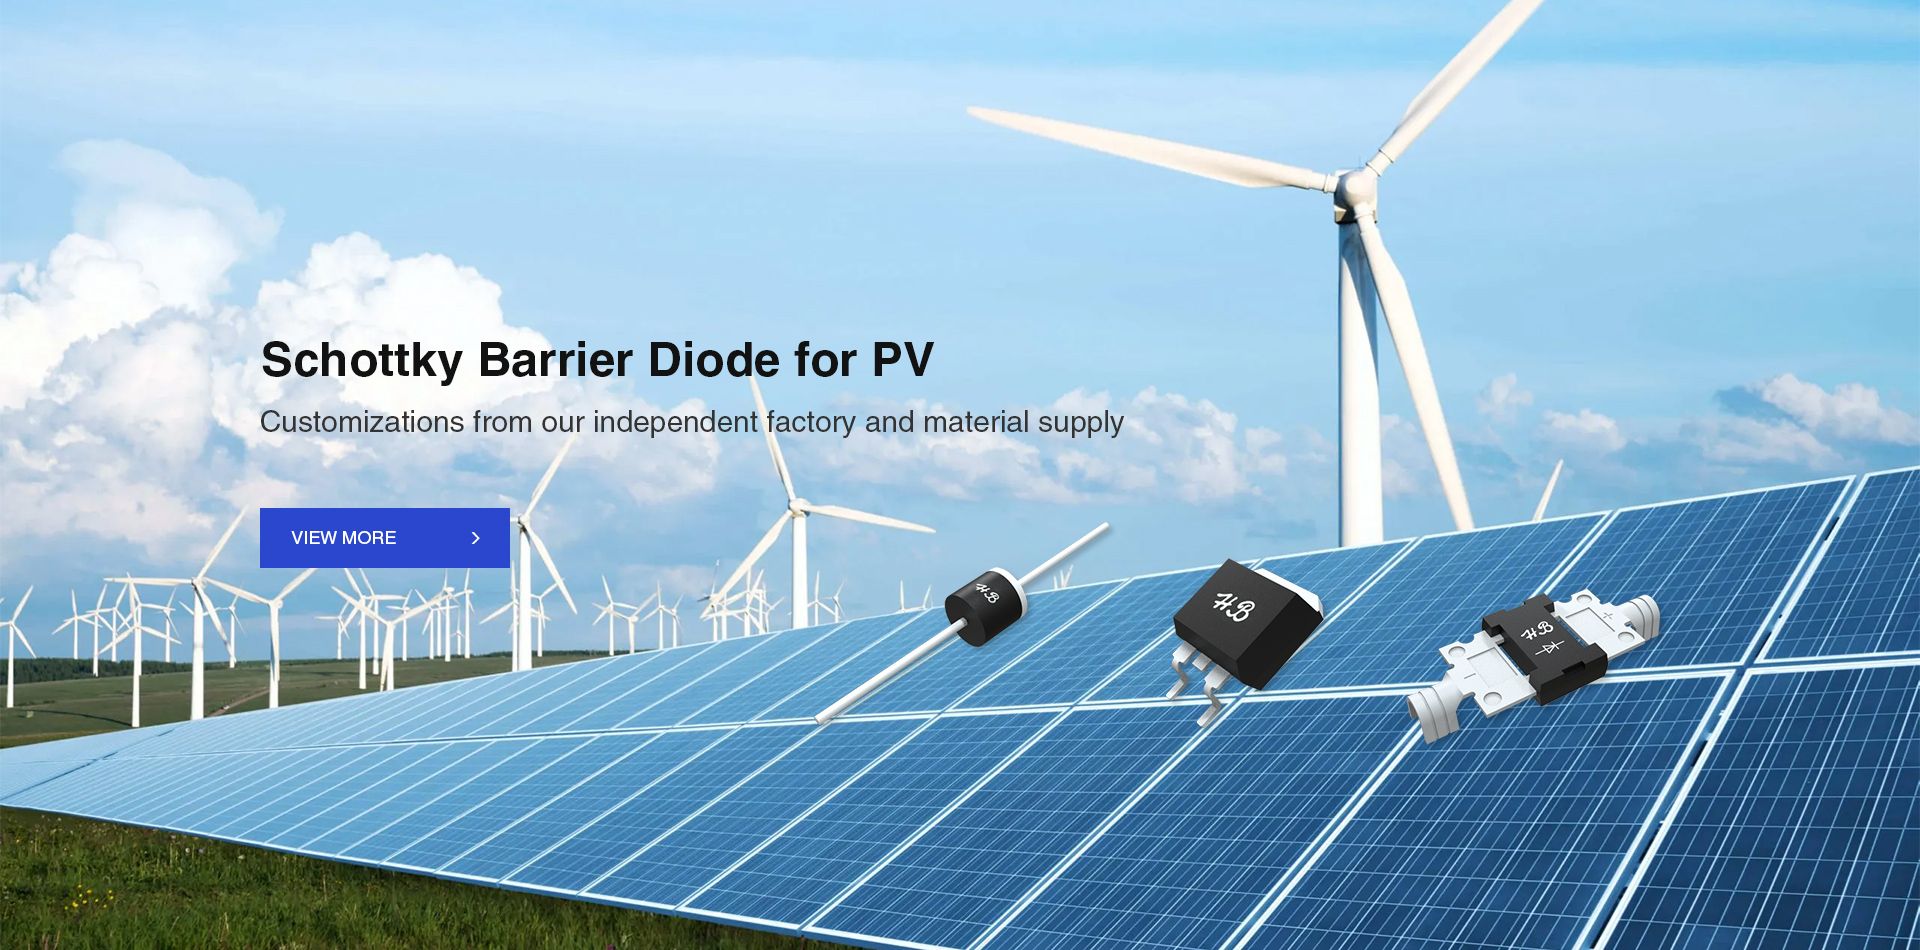 Schottky Barrier Diode for PV